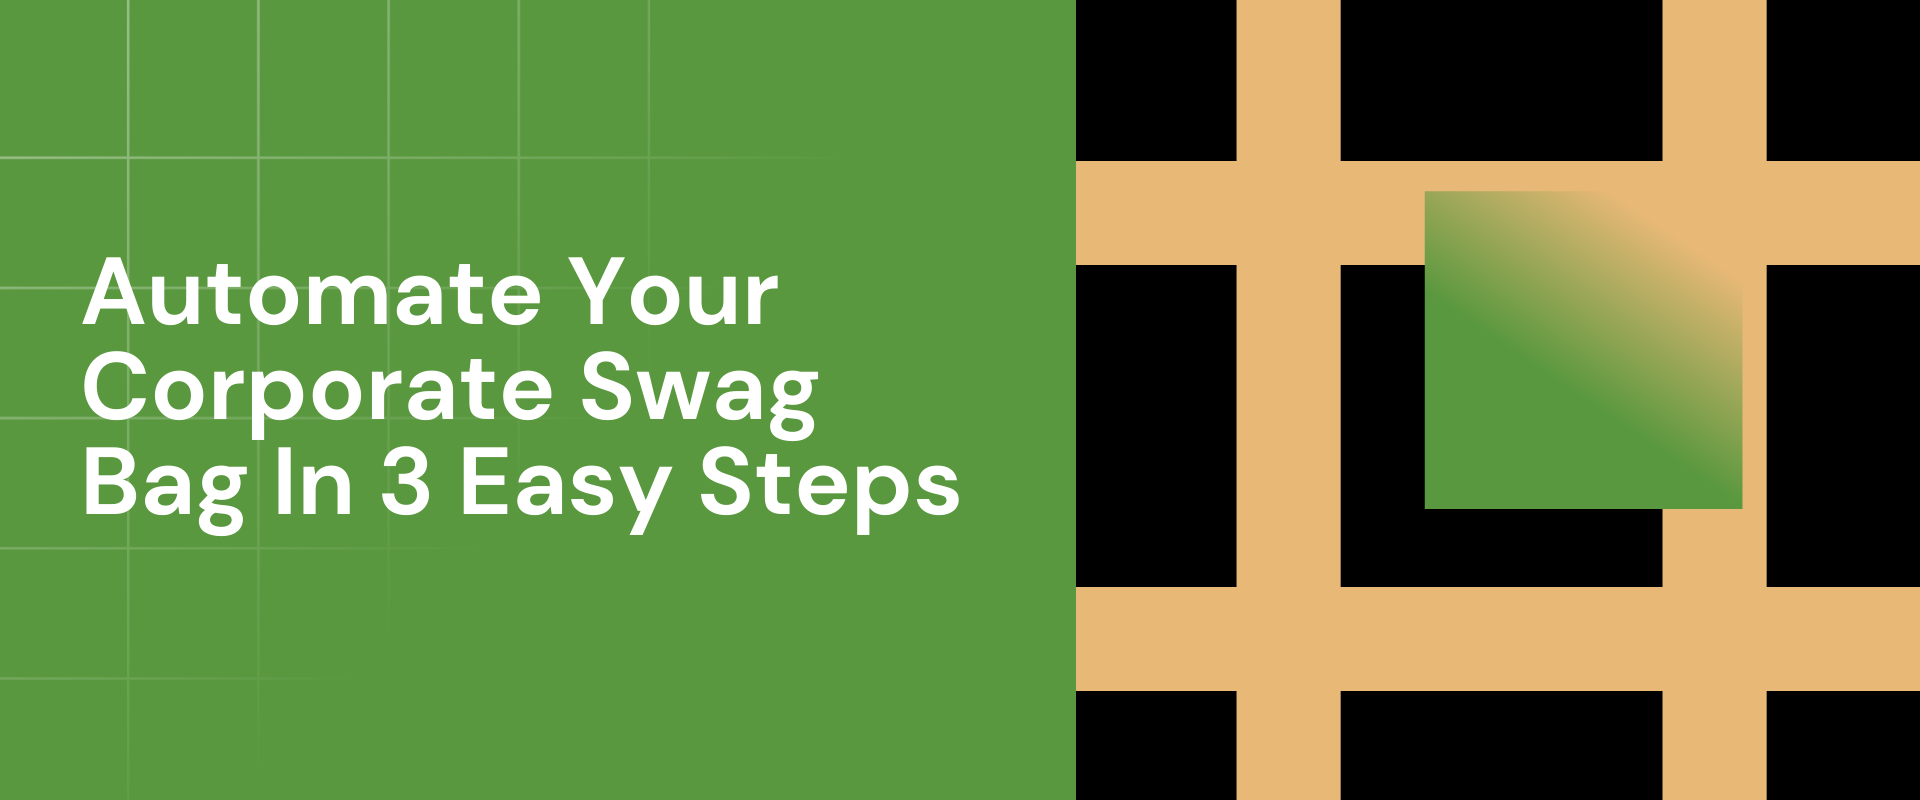 Automate Your Corporate Swag Bag In 3 Easy Steps – For HRs & Companies in India